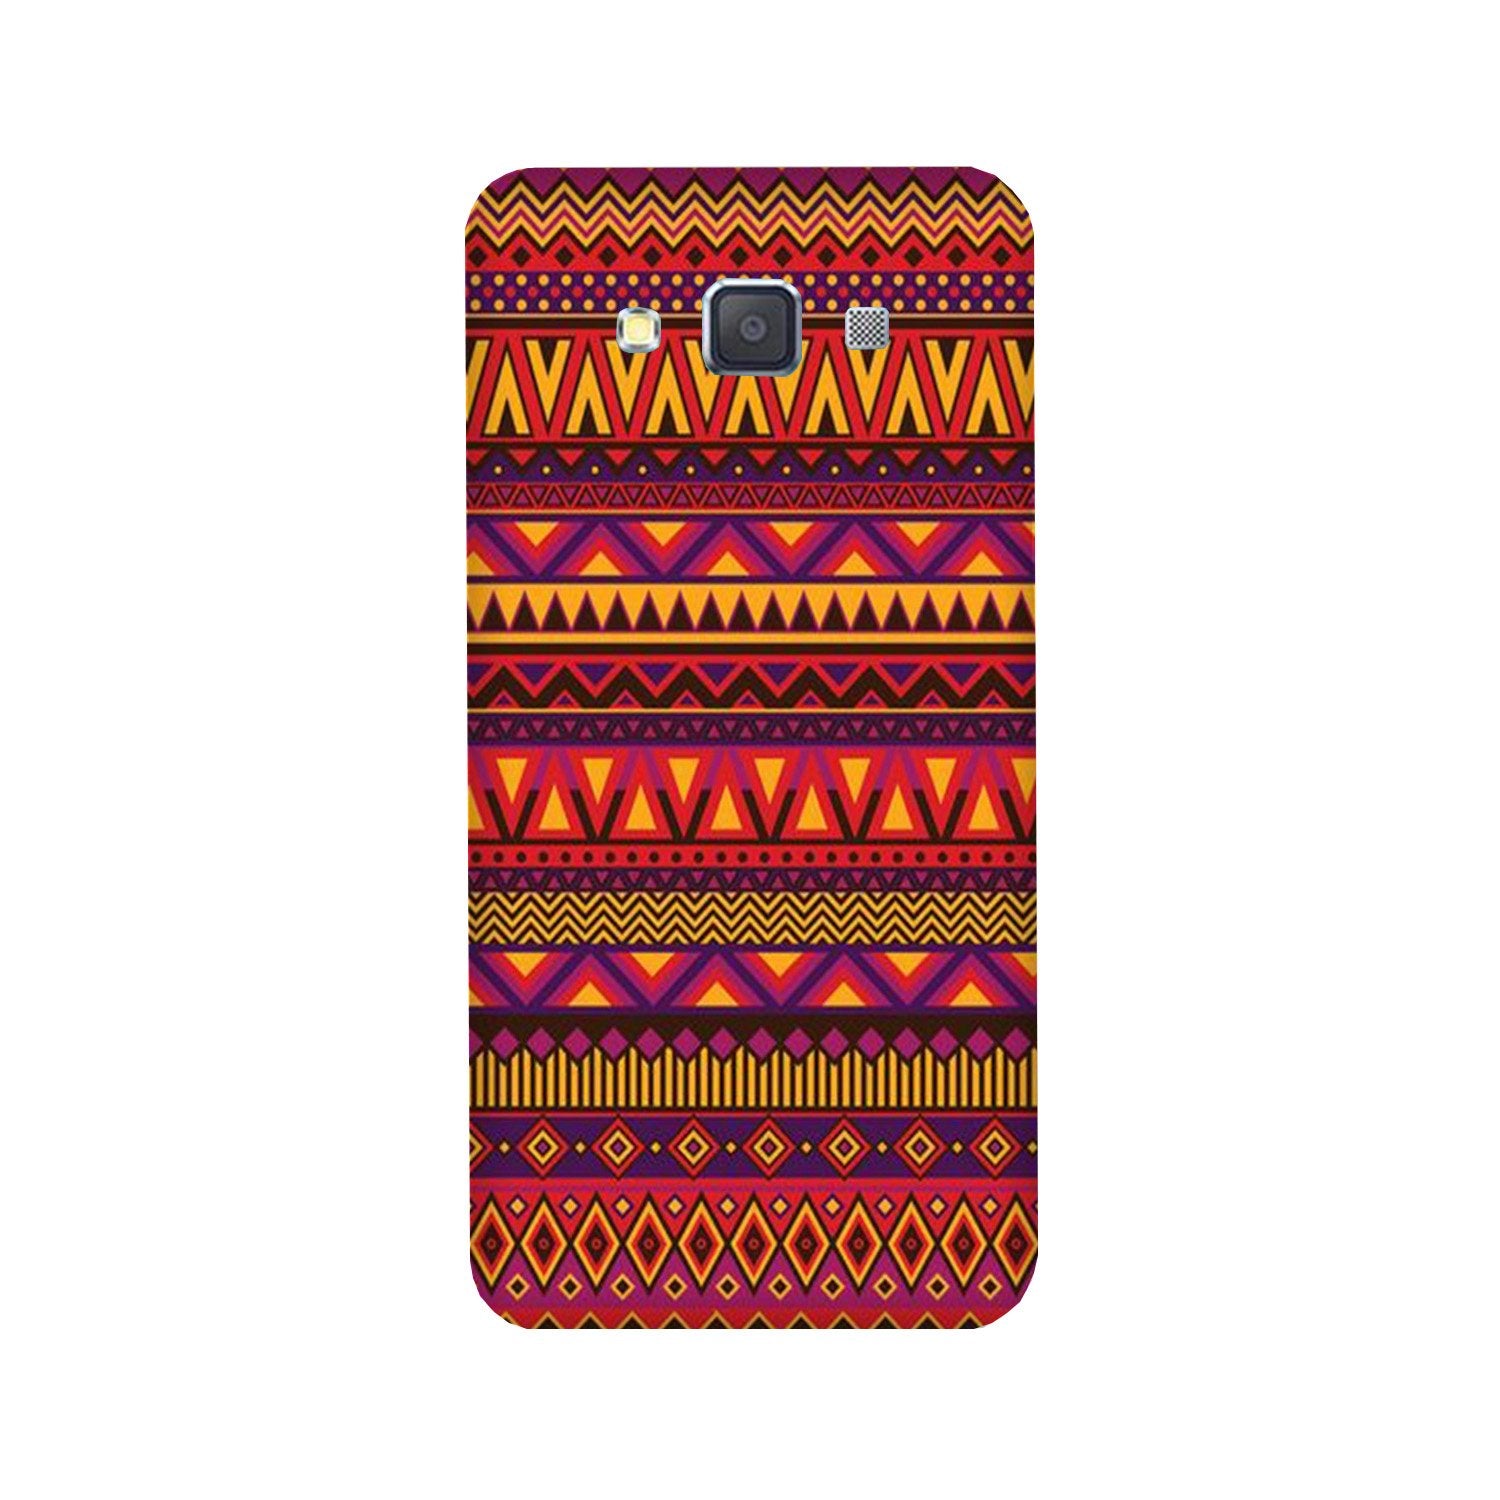 Zigzag line pattern2 Case for Galaxy A5 (2015)